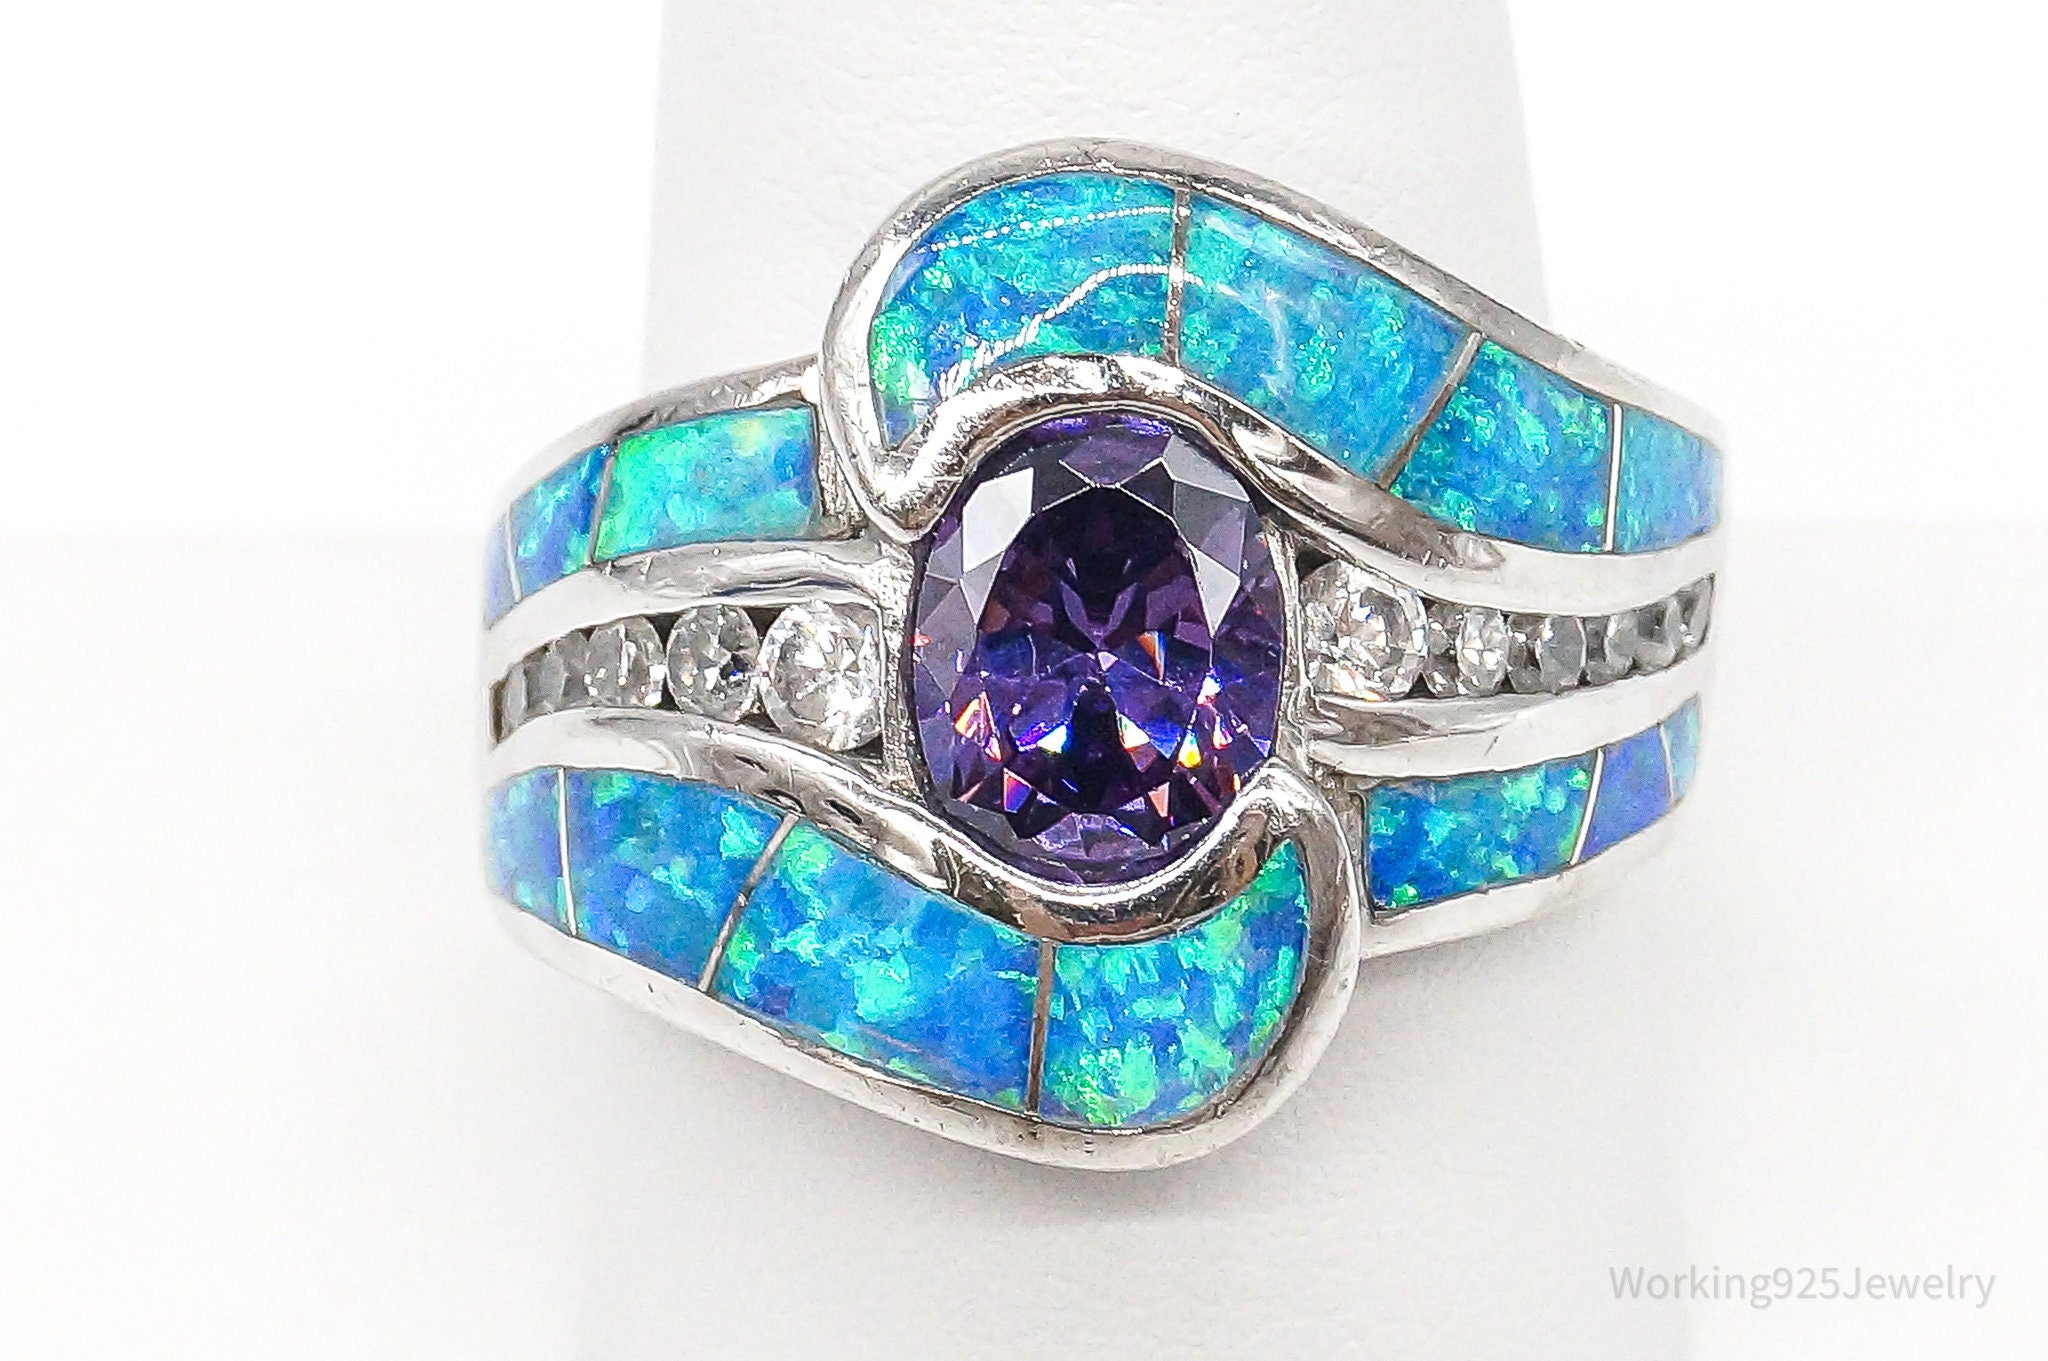 Amethyst Opal Cubic Zirconia Sterling Silver Ring - Size 10.5